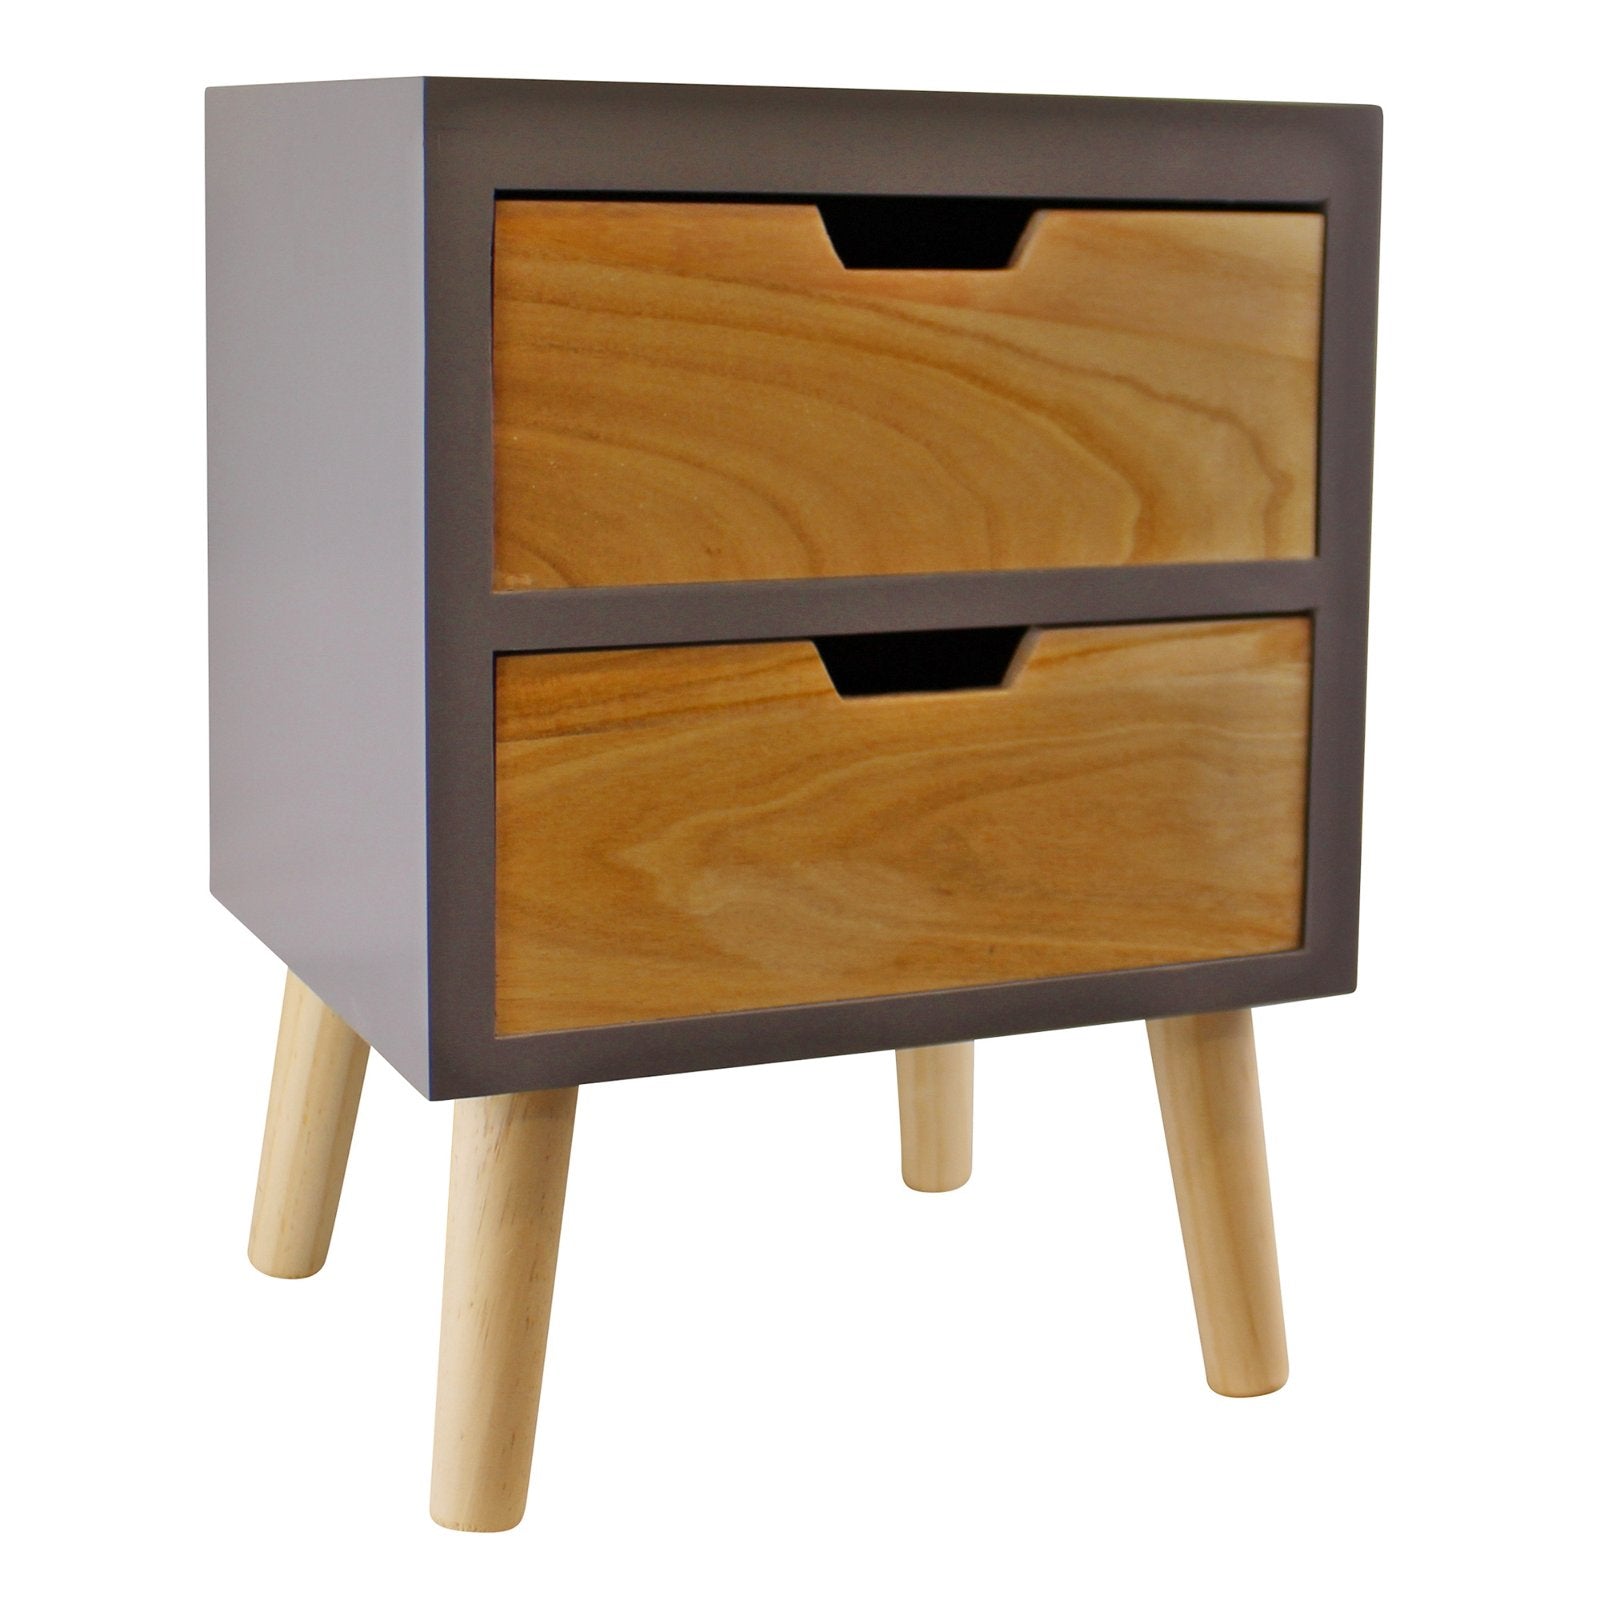 2 Drawer Chest In Grey Finish With Natural Drawers & Removable Legs